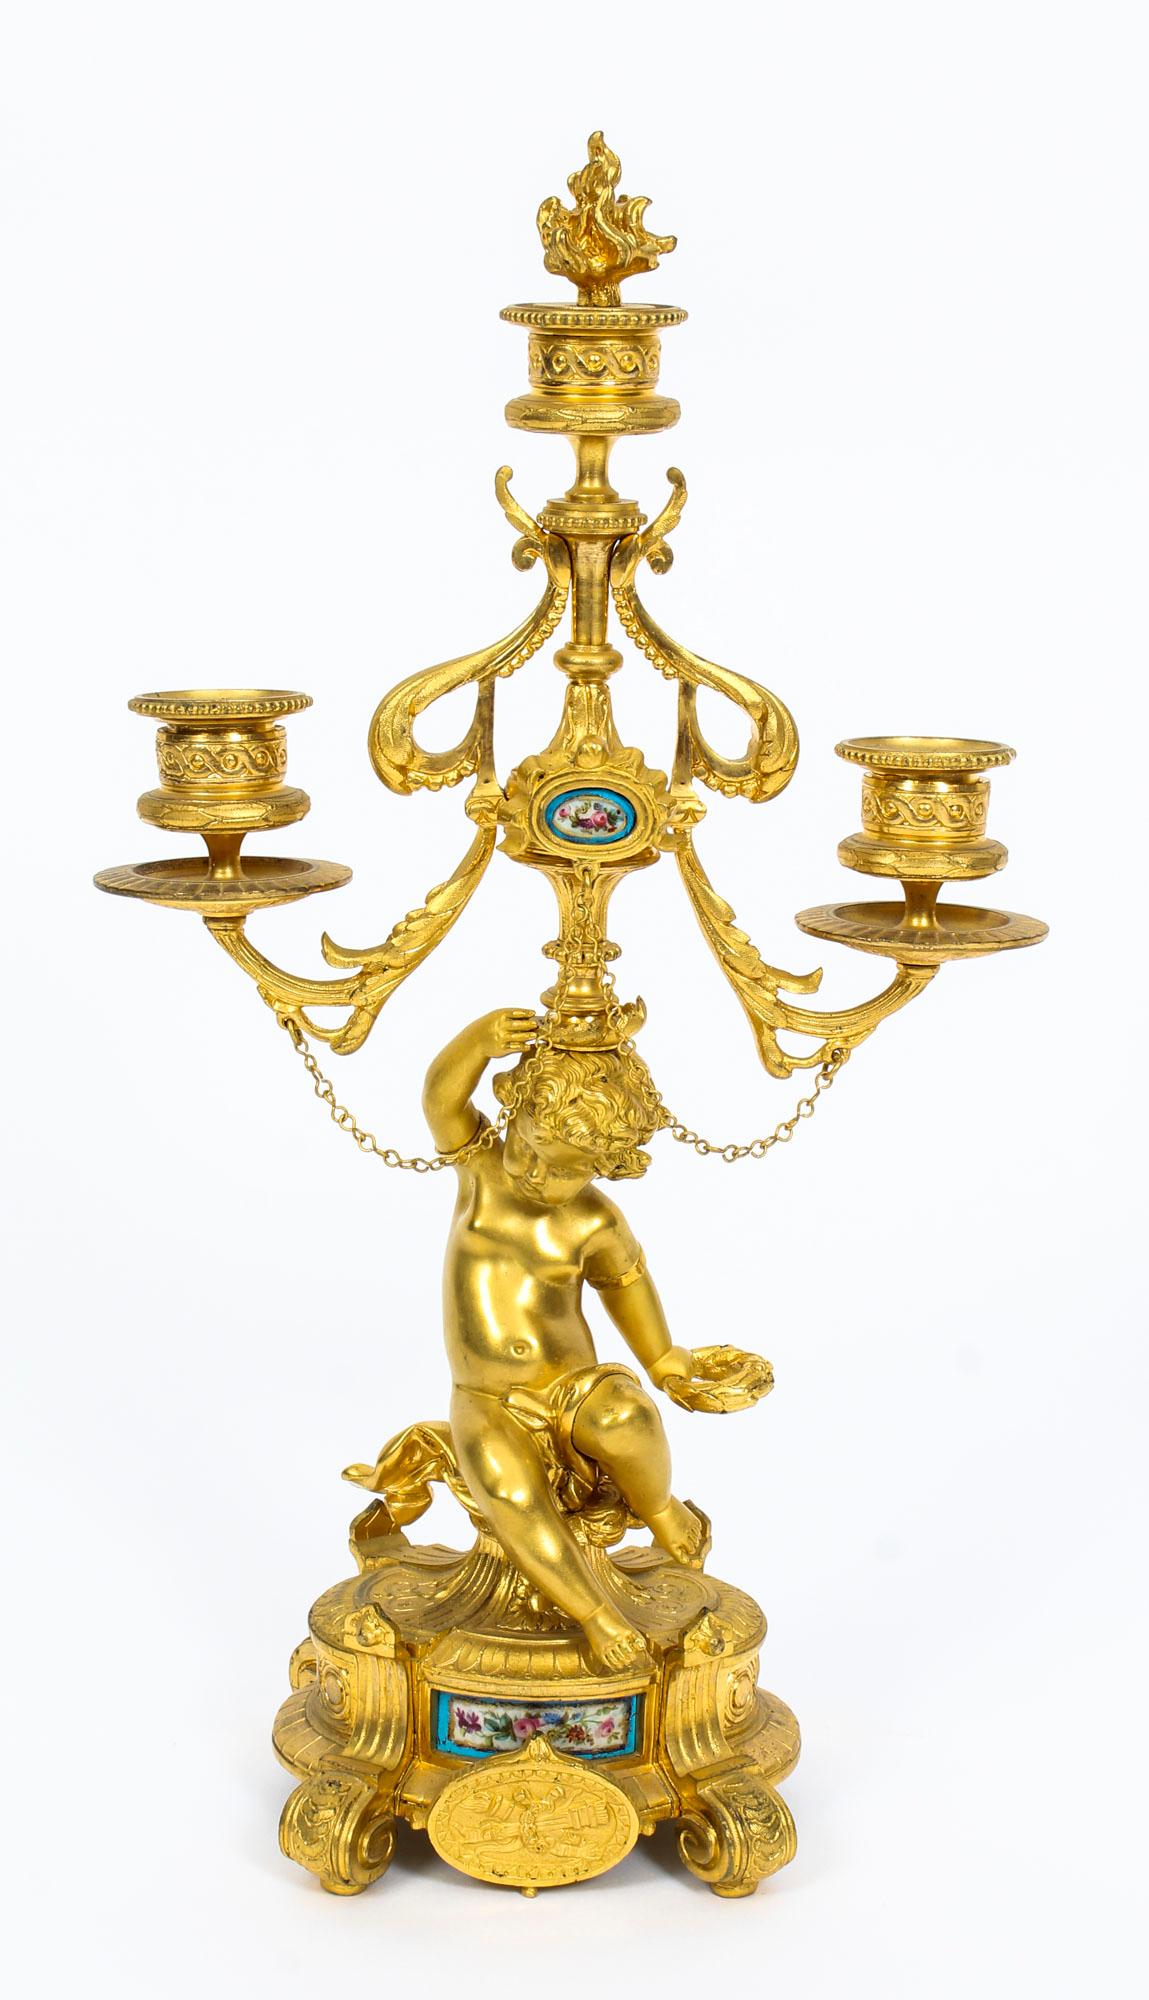 This is a delightful high quality antique pair of Louis Revival ormolu and Sèvres porcelain three-branch candelabra, circa 1860 in date.

The candelabra feature small inset oval floral painted Sèvres porcelain plaques. 

Each has a central